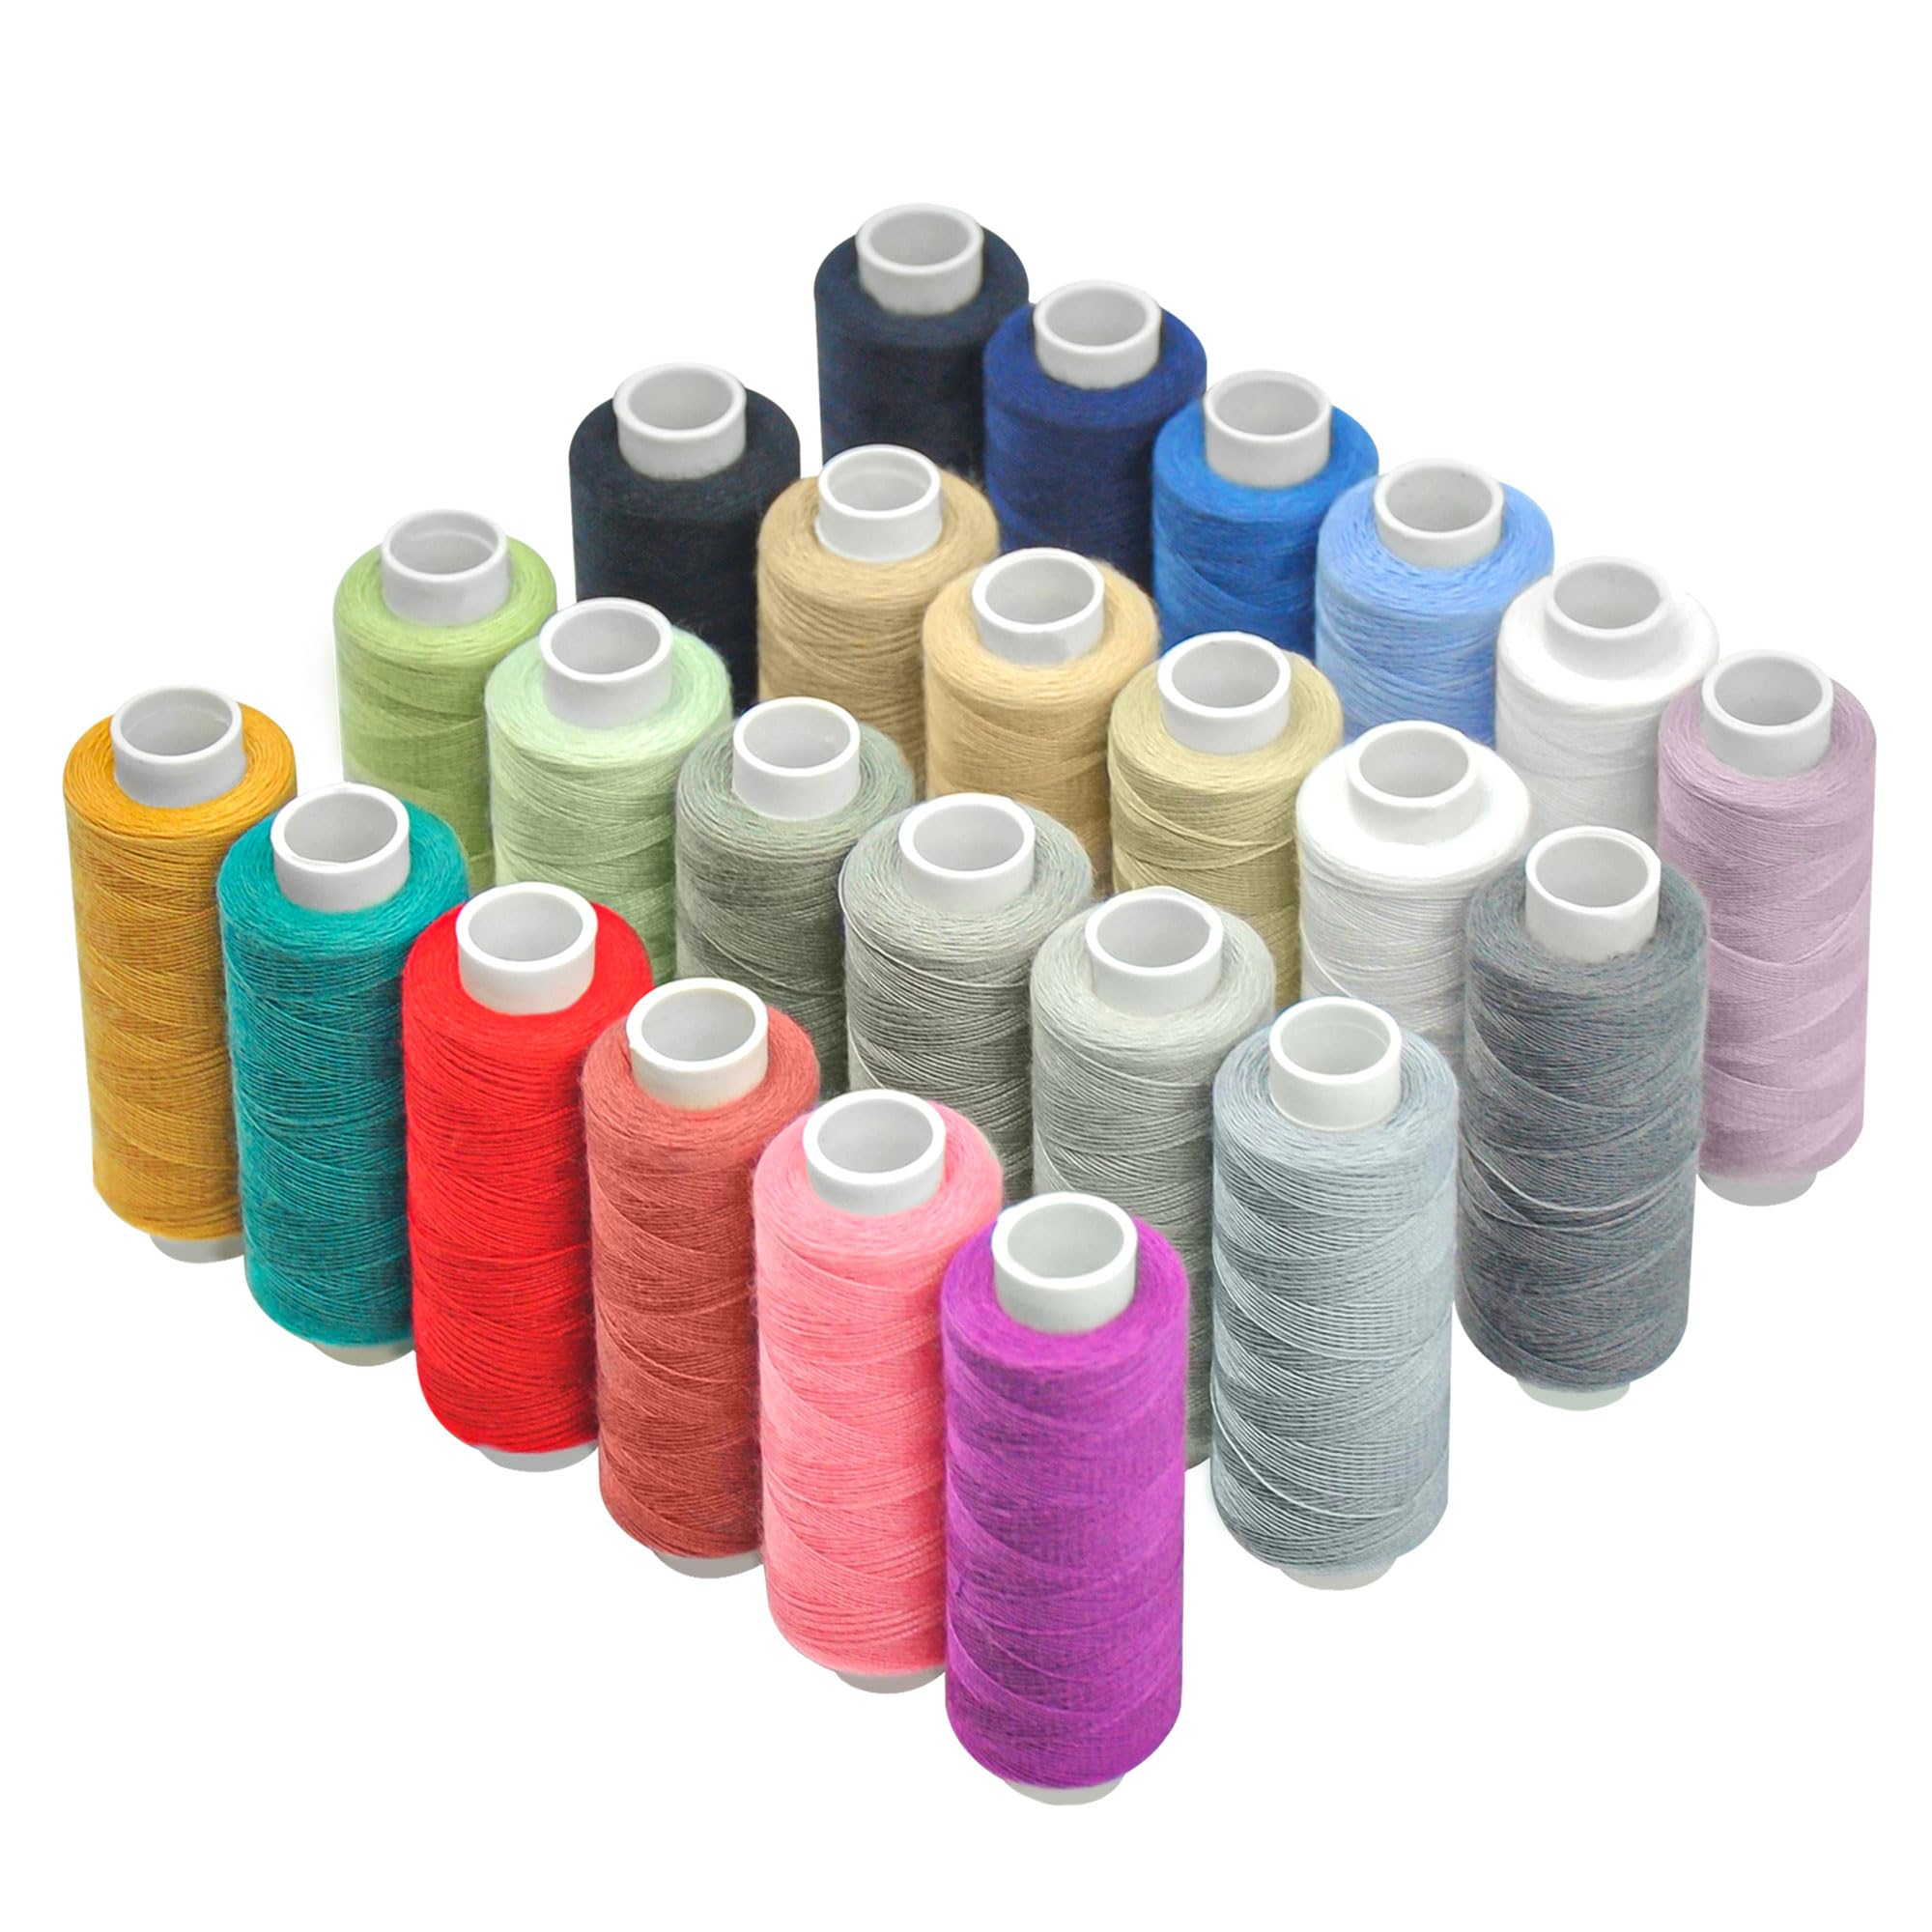 Sewing Thread-24 Spools of Polyester Thread for Hand & Machine Sewing